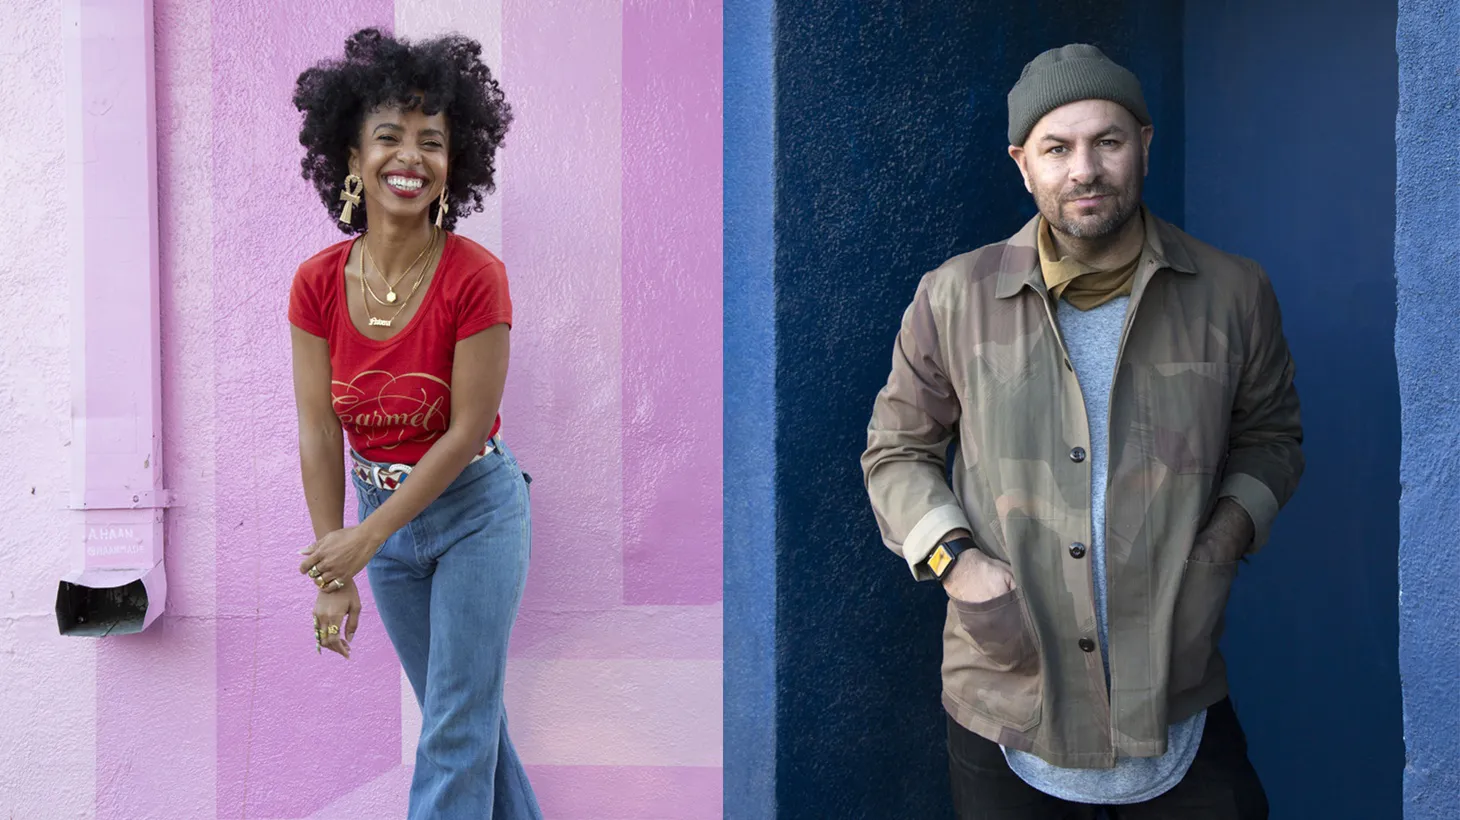 KCRW's signature music program features new releases, live performances, and artist interviews hosted by Anthony Valadez & Novena Carmel.